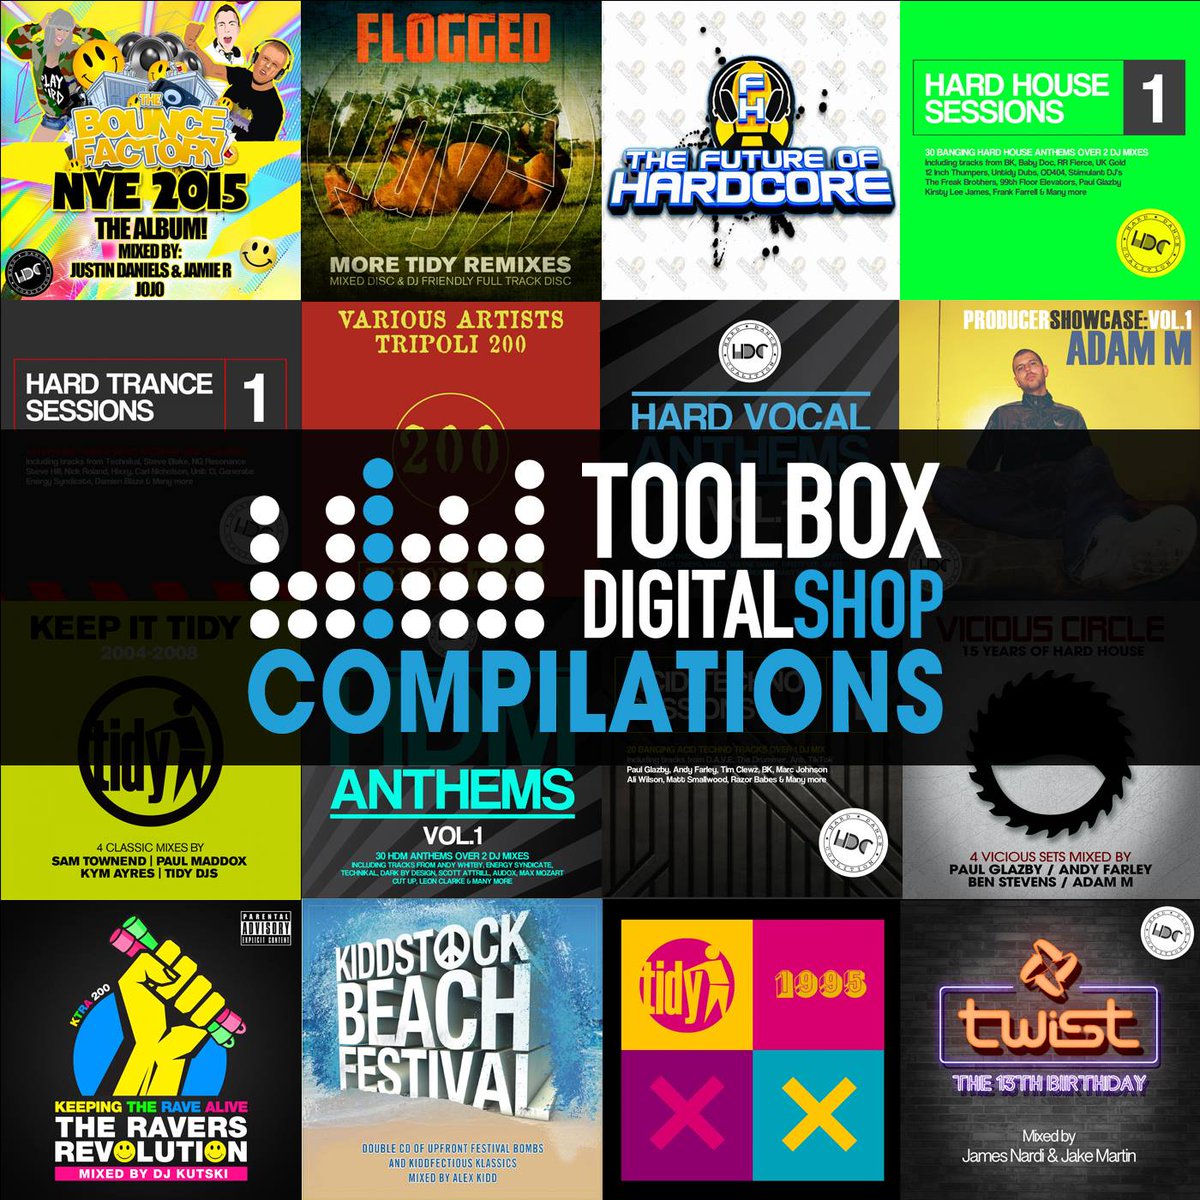 Digital Compilations are a great way to increase your music library for a fraction of the cost as many come bundled with all the single tracks.

Check out our compilations section and grab some fresh music:
tlbx.digital/CompilationAlb…

#hardhouse #harddance #hardcore #toolboxdigital